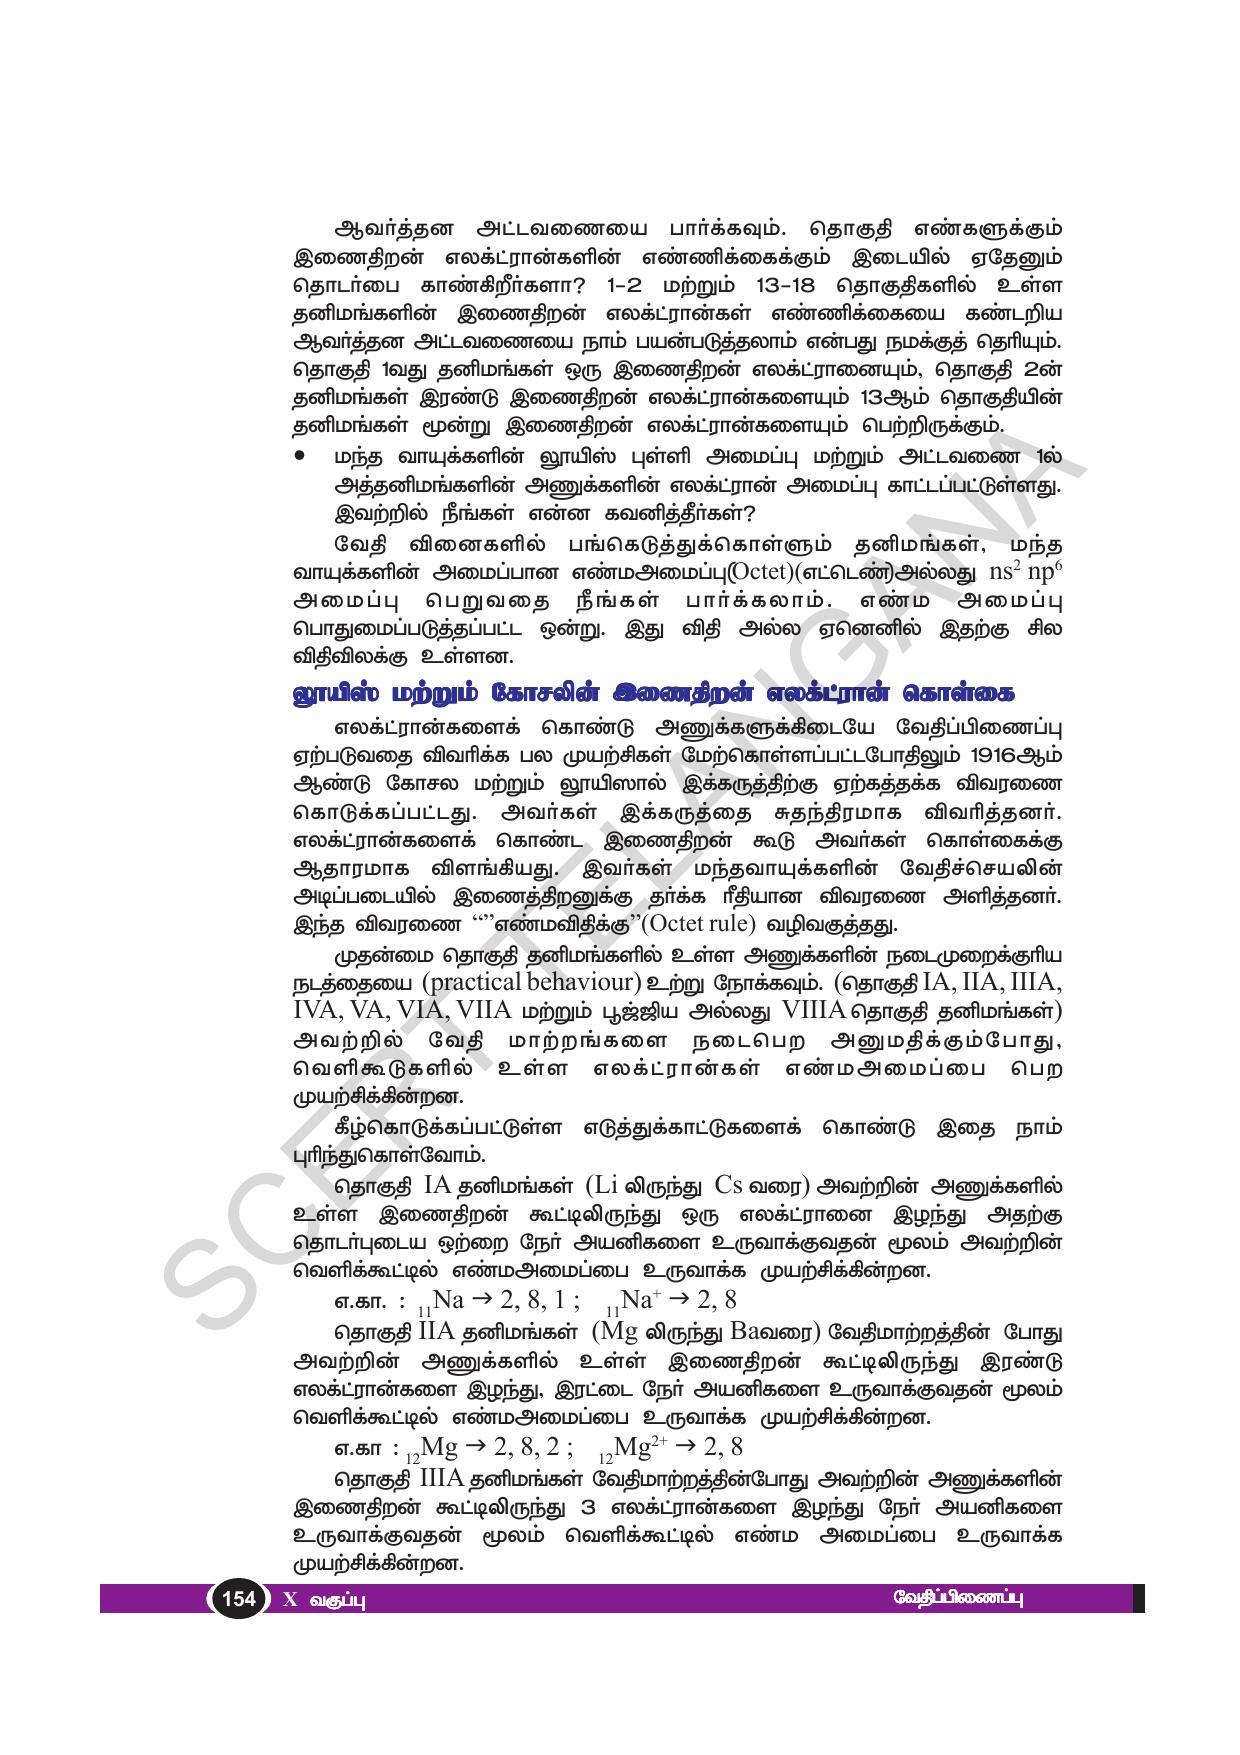 TS SCERT Class 10 Physical Science(Tamil Medium) Text Book - Page 166